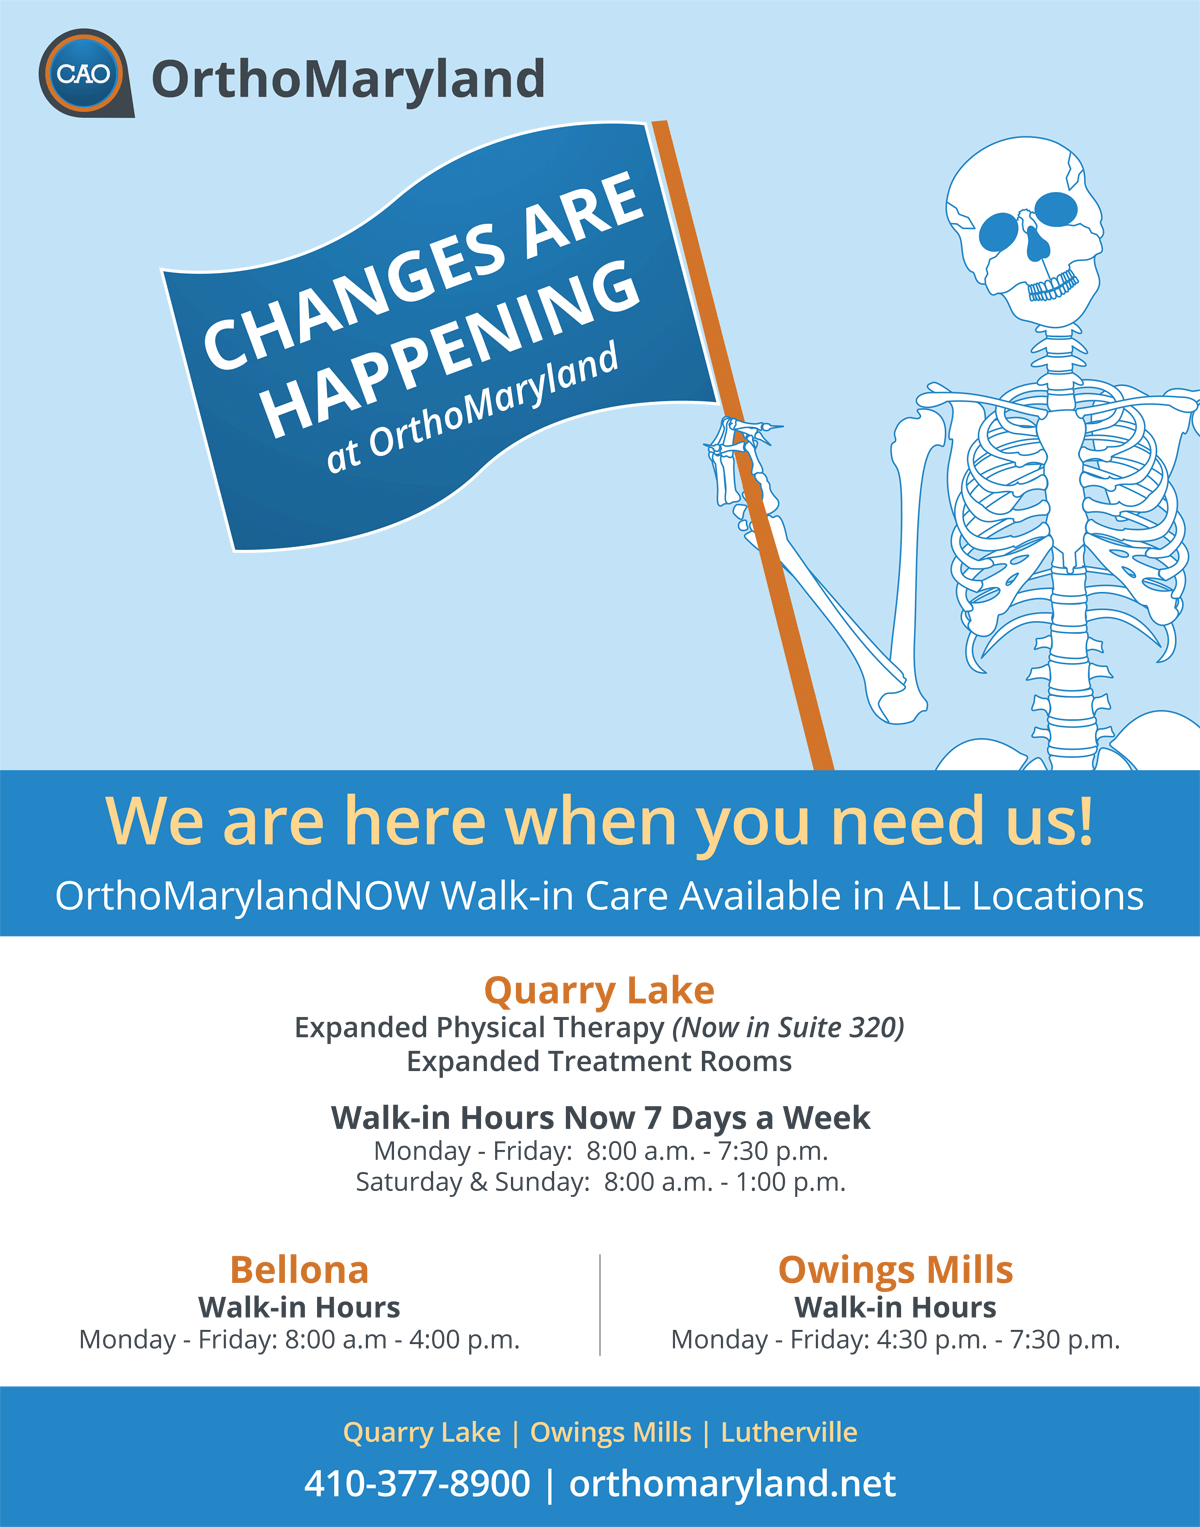 OrthoMarylandNOW Walk-in Care Available in ALL locations